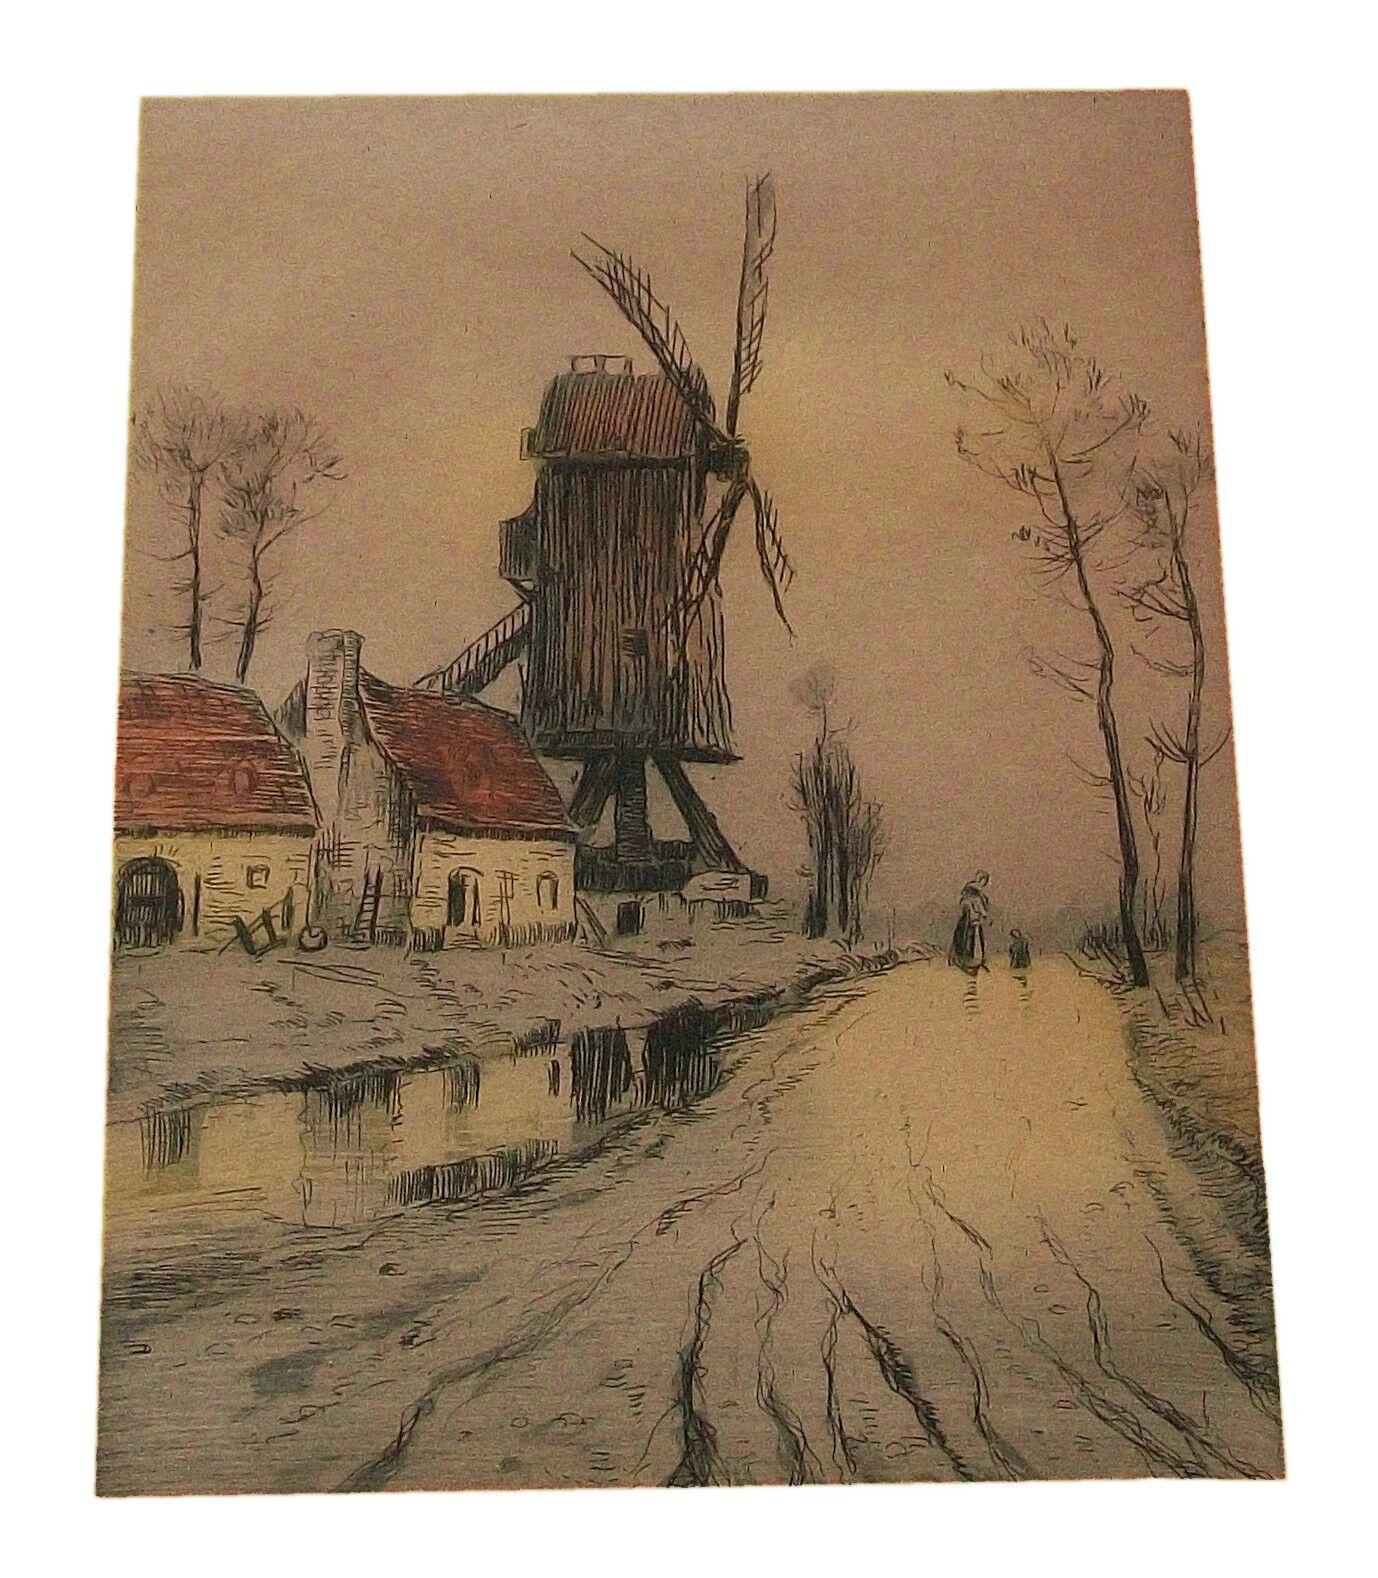 LOUIS ÉTIENNE DAUPHIN (1885-1926) - Untitled (Village with Windmill) - Post Impressionist fine art color copperplate engraving - signed lower right - unframed - France - circa 1920. 

Good antique condition - over-all toning (from previous acidic